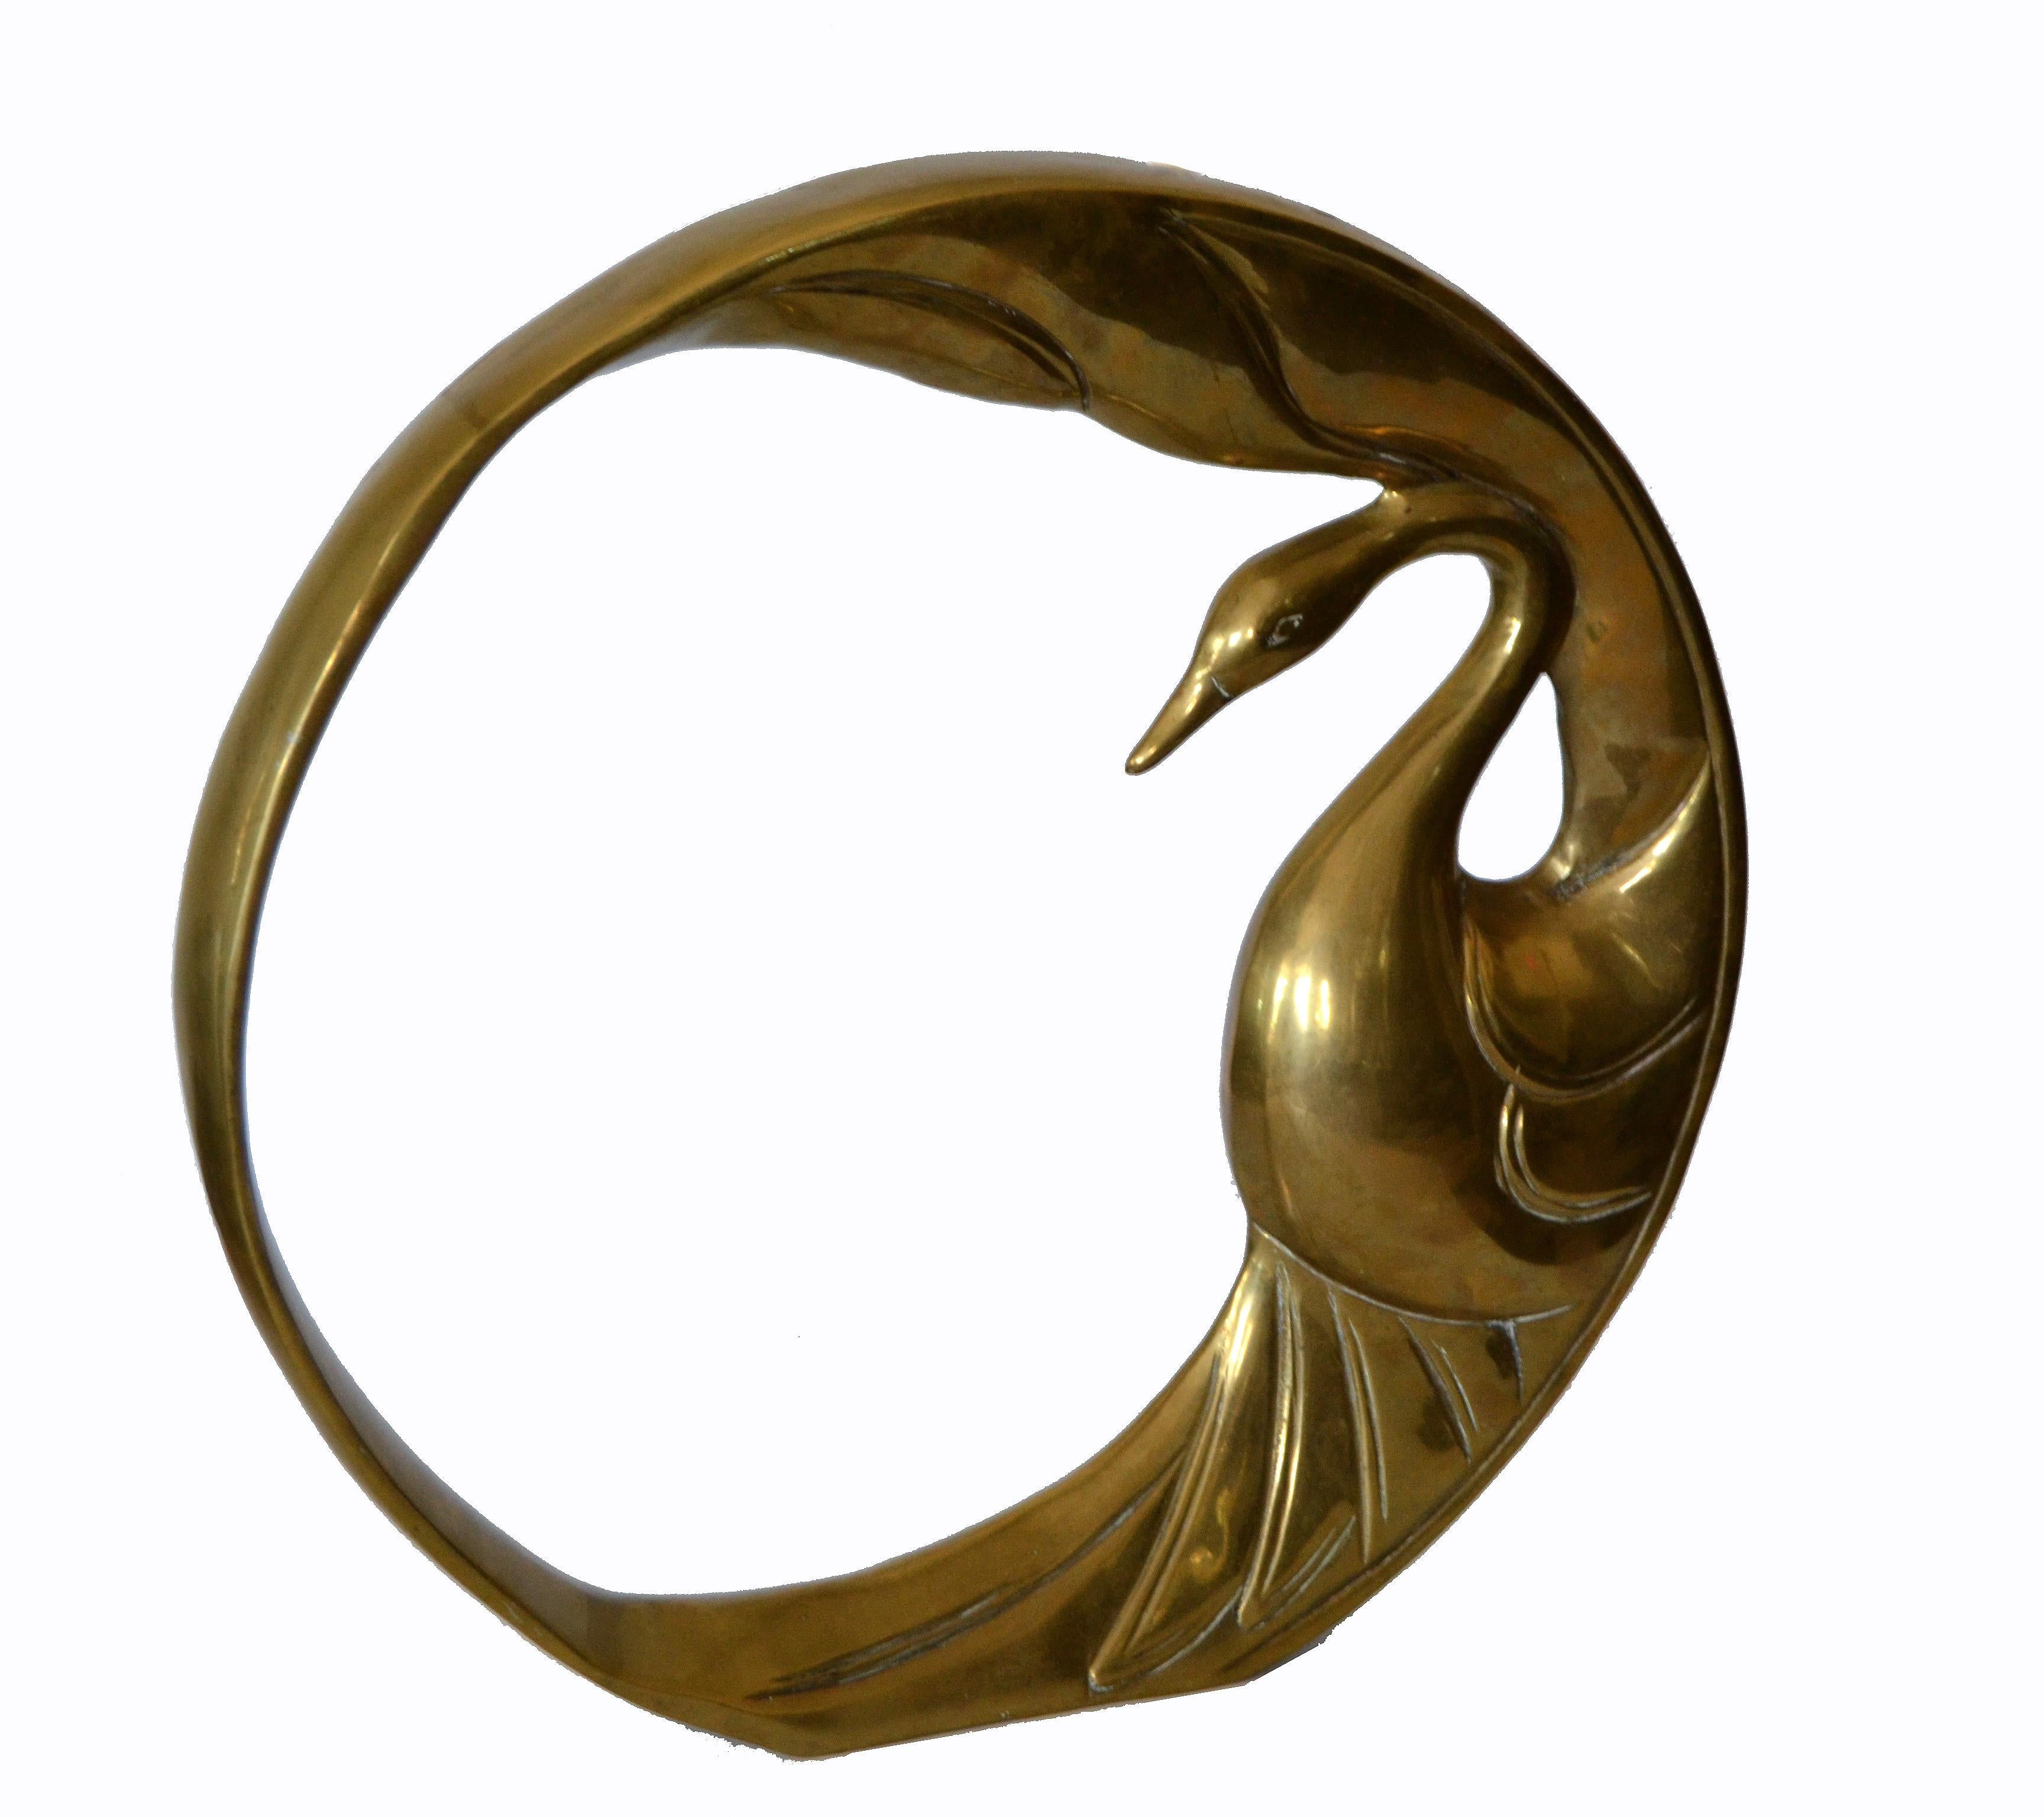 American Mid-Century Modern Bronze Golden Swan Ring Table Sculpture by Dolbi Cashier 1984 For Sale